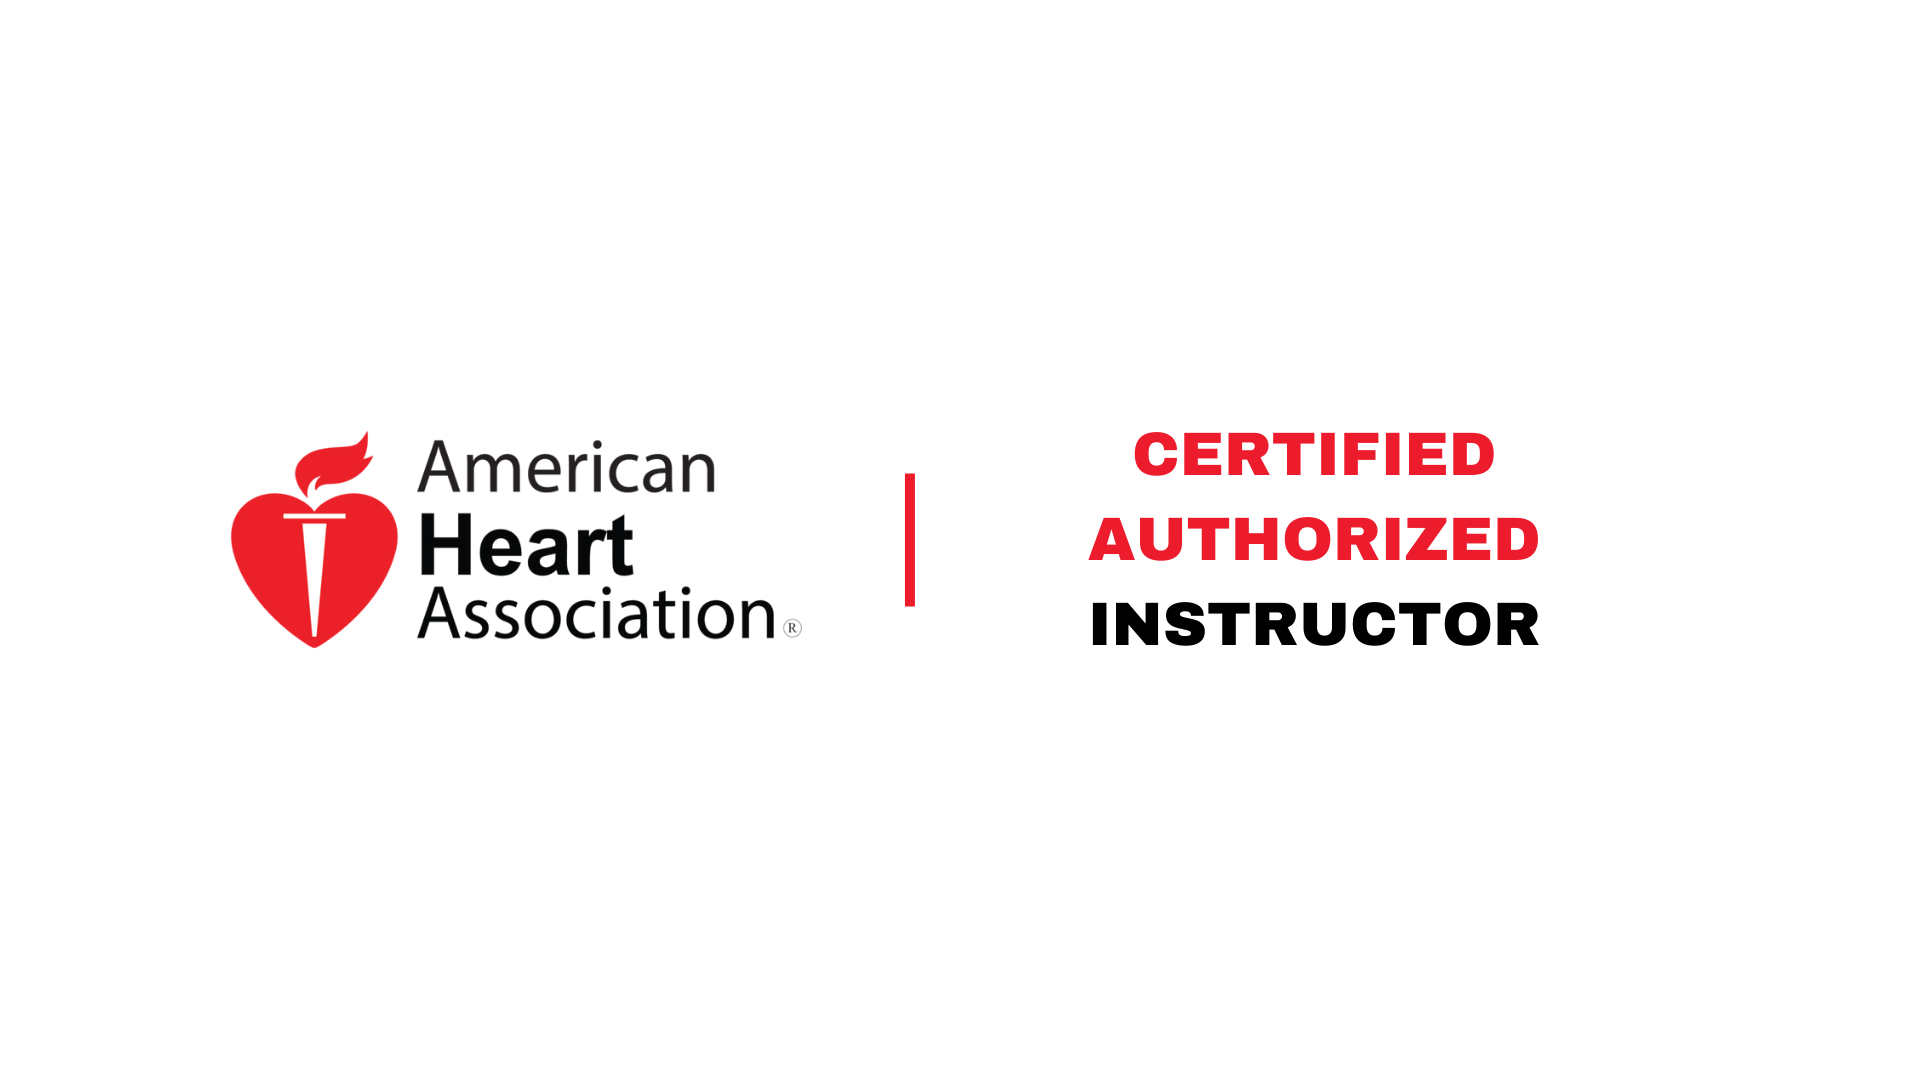 American Heart Association Certified Authorized Instructor